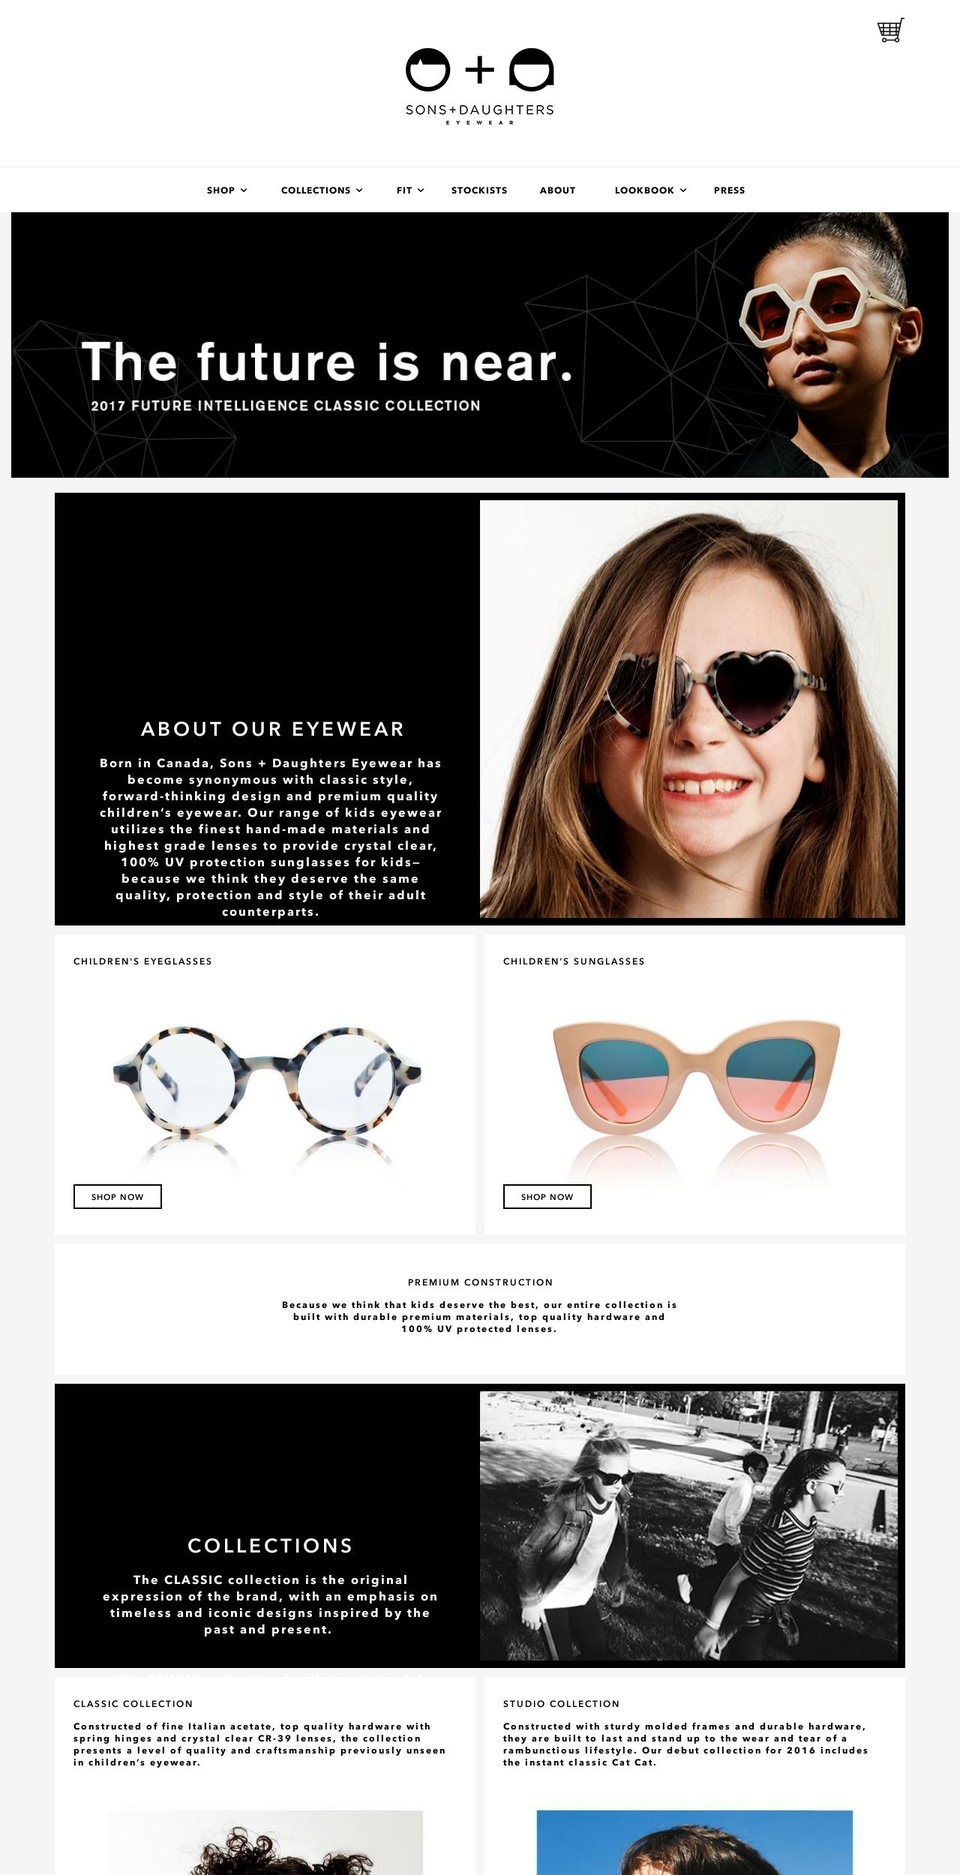 Palo Alto Shopify theme site example wearesonsanddaughters.com